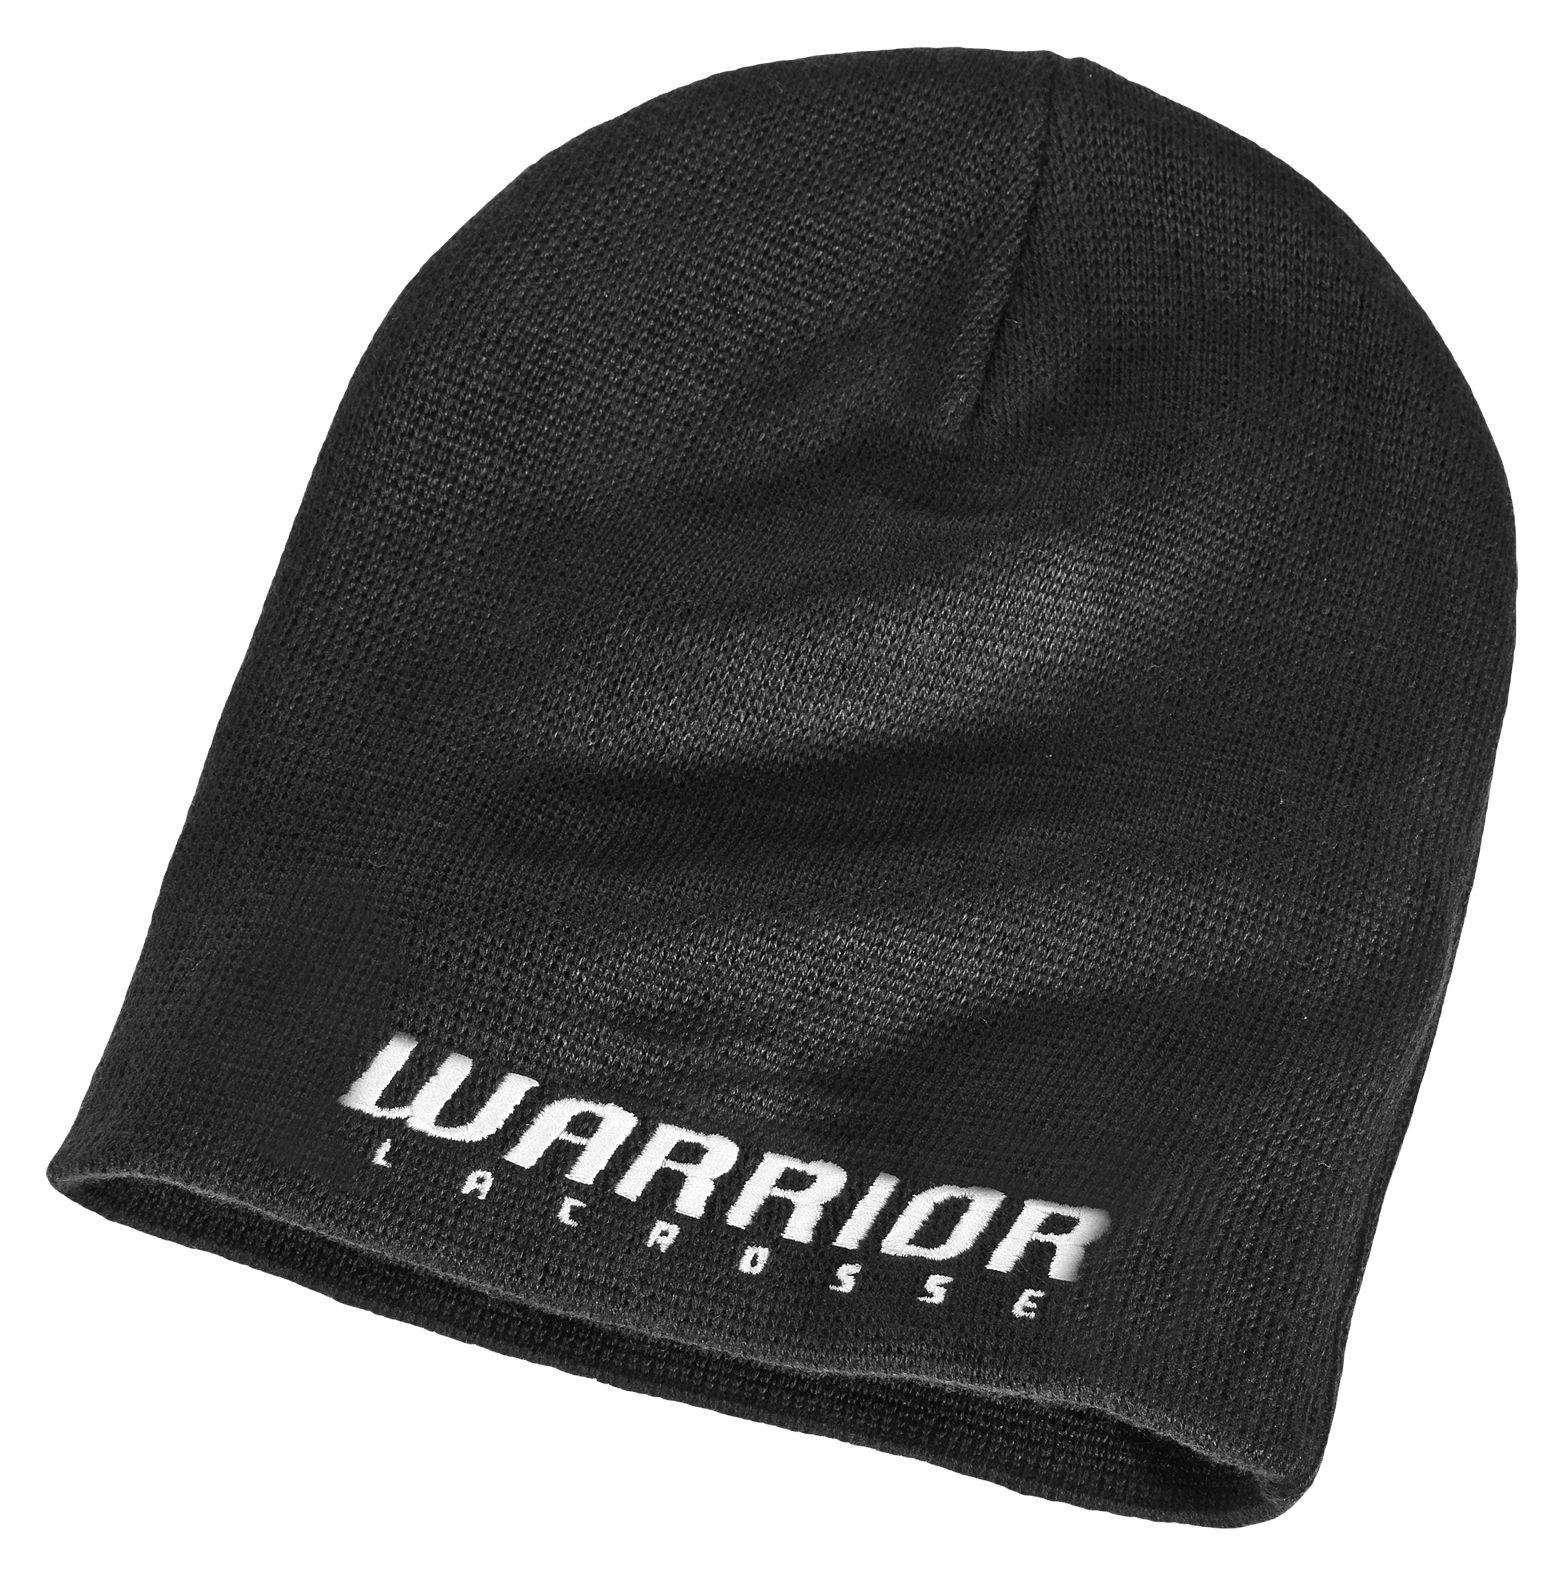 Lax Beanie, Black with White image number 0